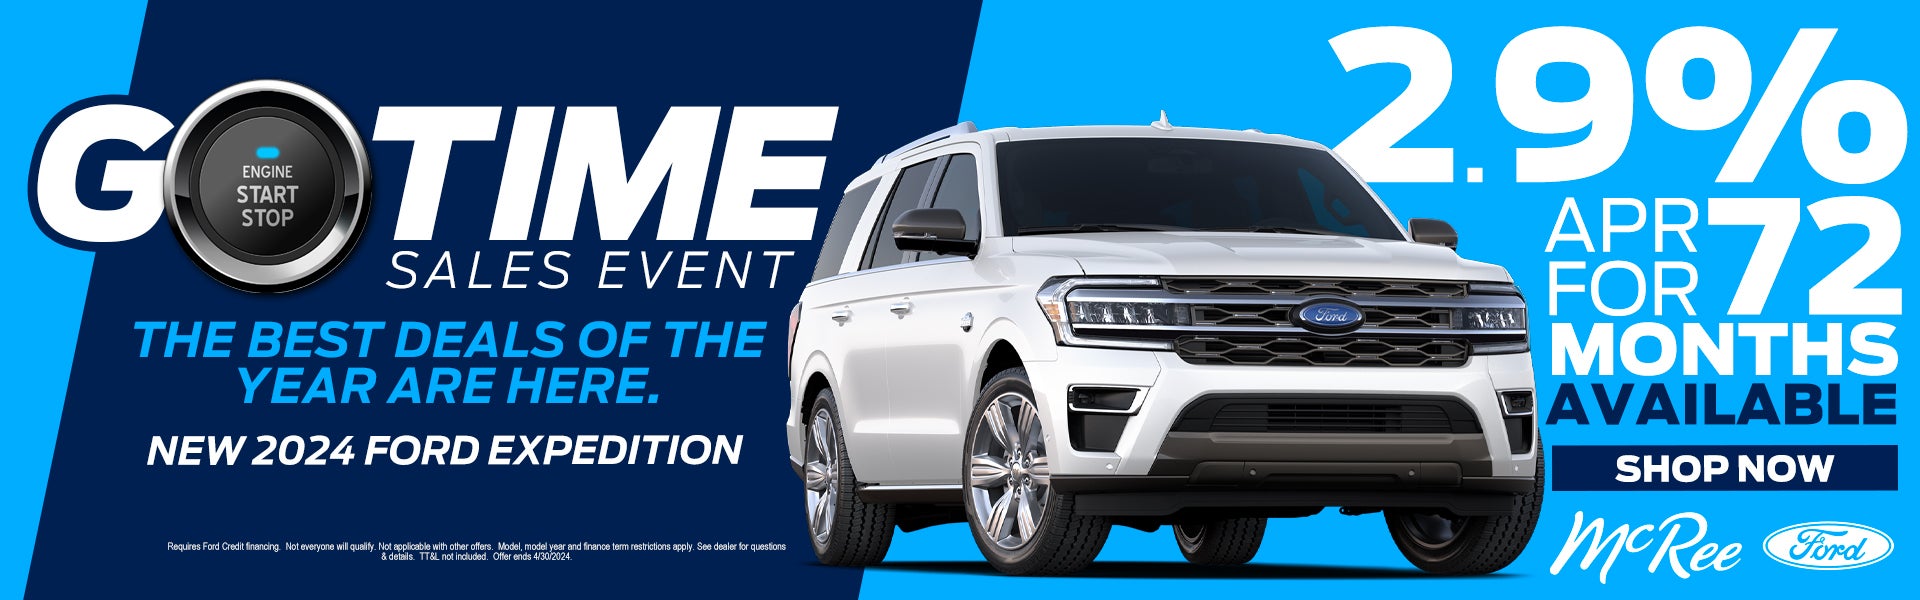 EXPEDITION SPECIALS AT MCREE FORD